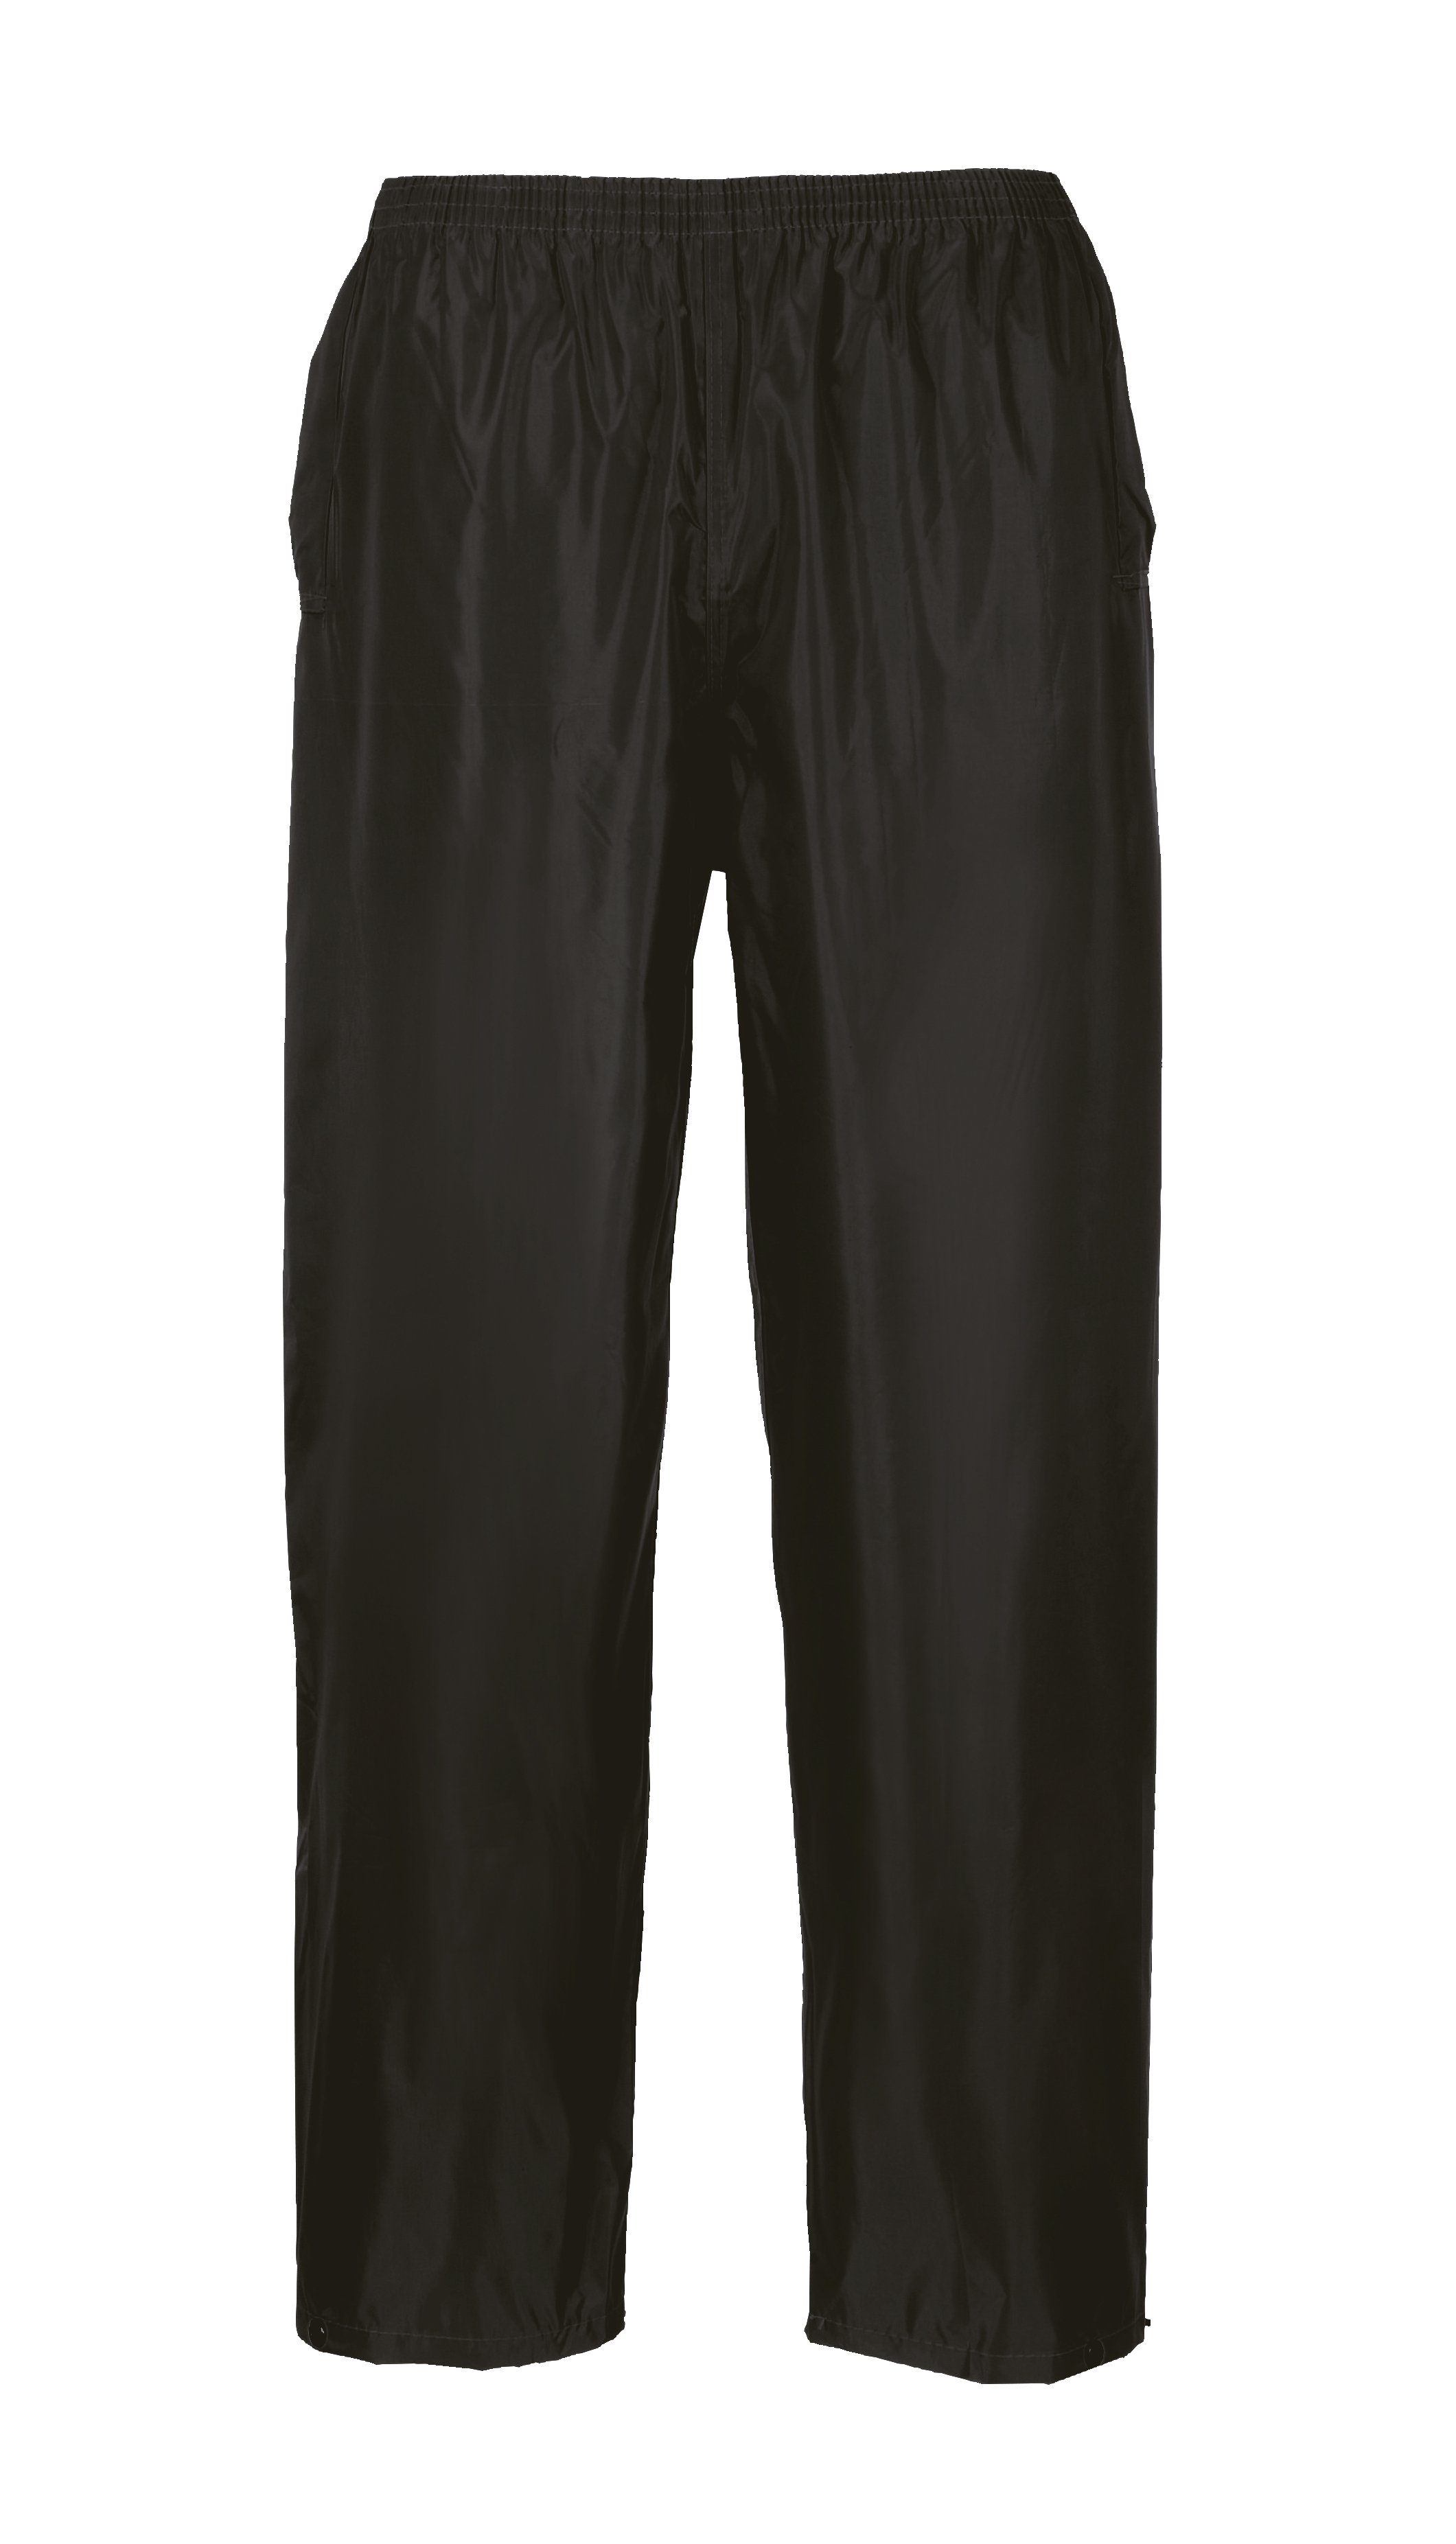 ax-httpss3.eu-west-2.amazonaws.comwebsystemstmp_for_downloadportwest-classic-adult-rain-trousers-black.jpeg